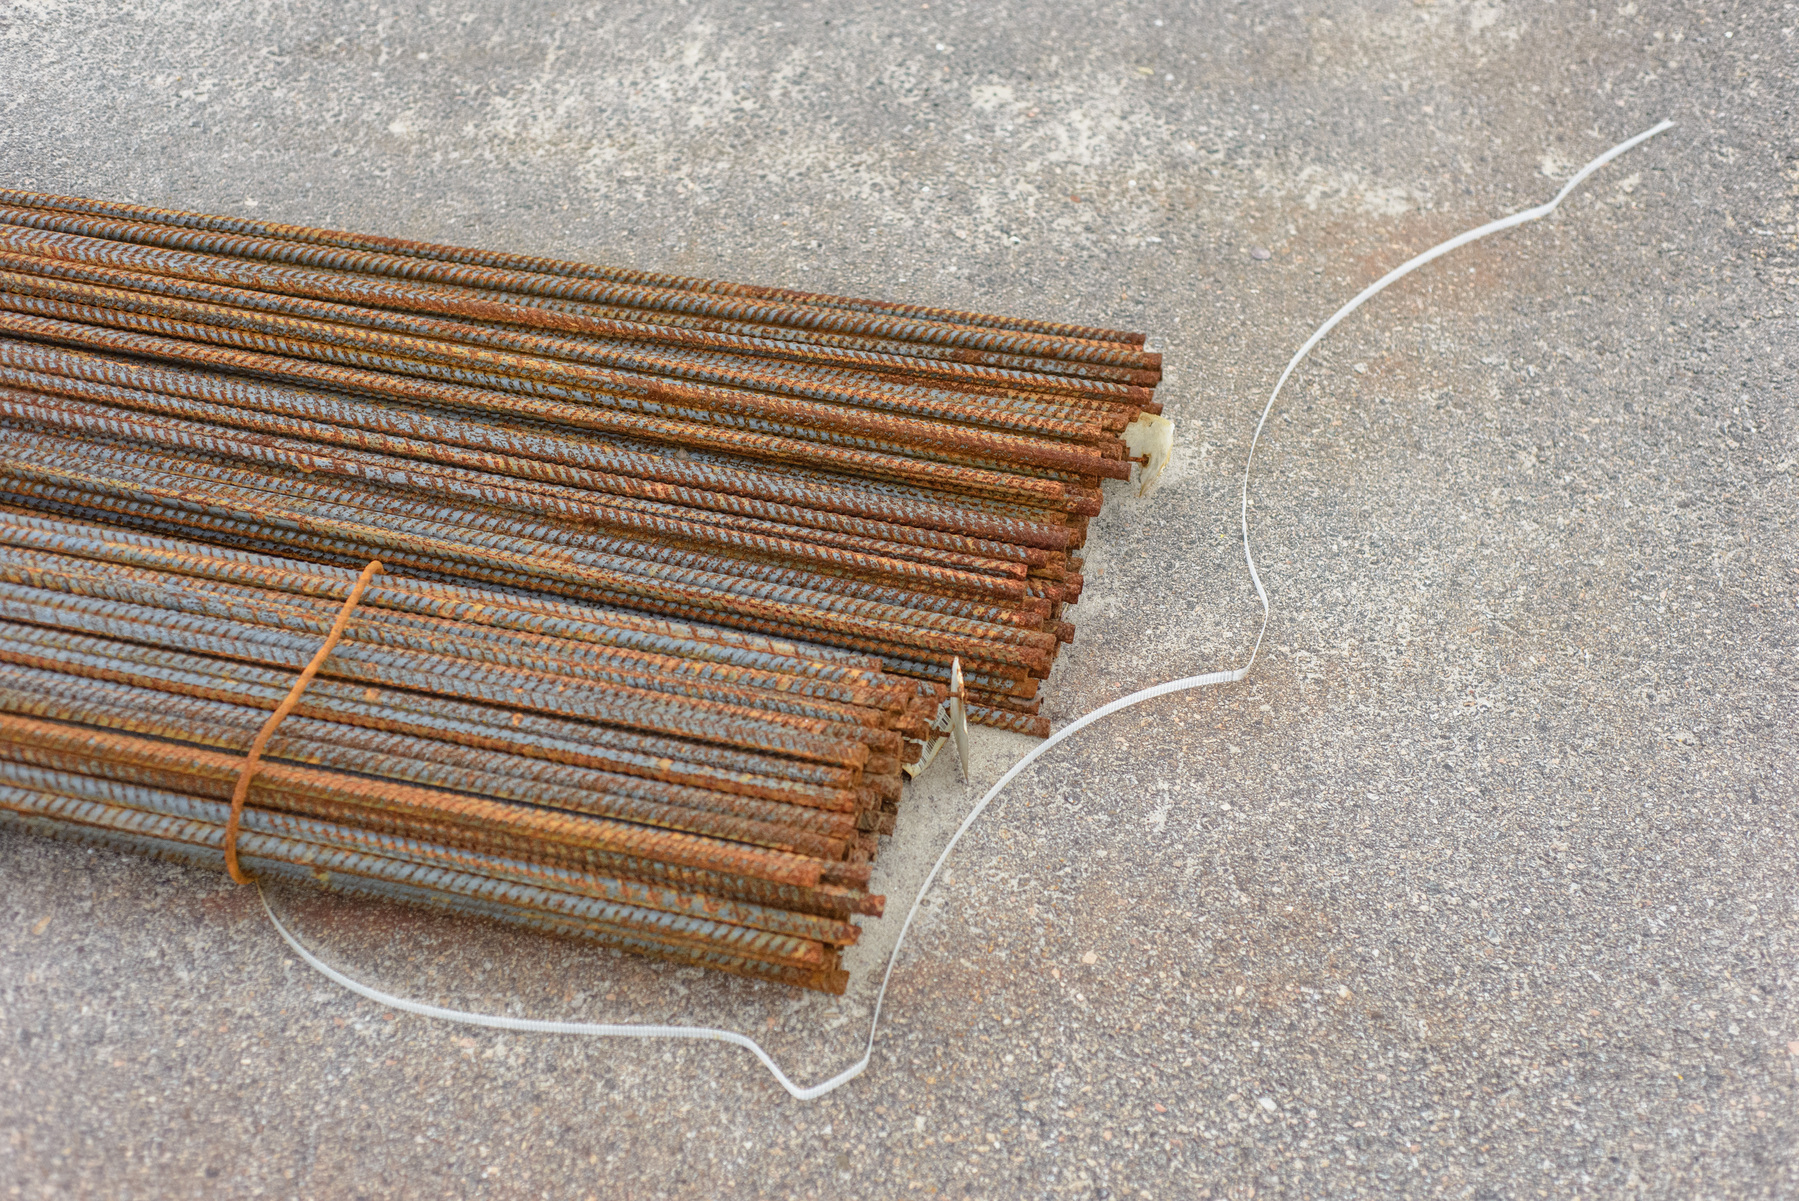 Reinforcing bars and plastic binding strap.